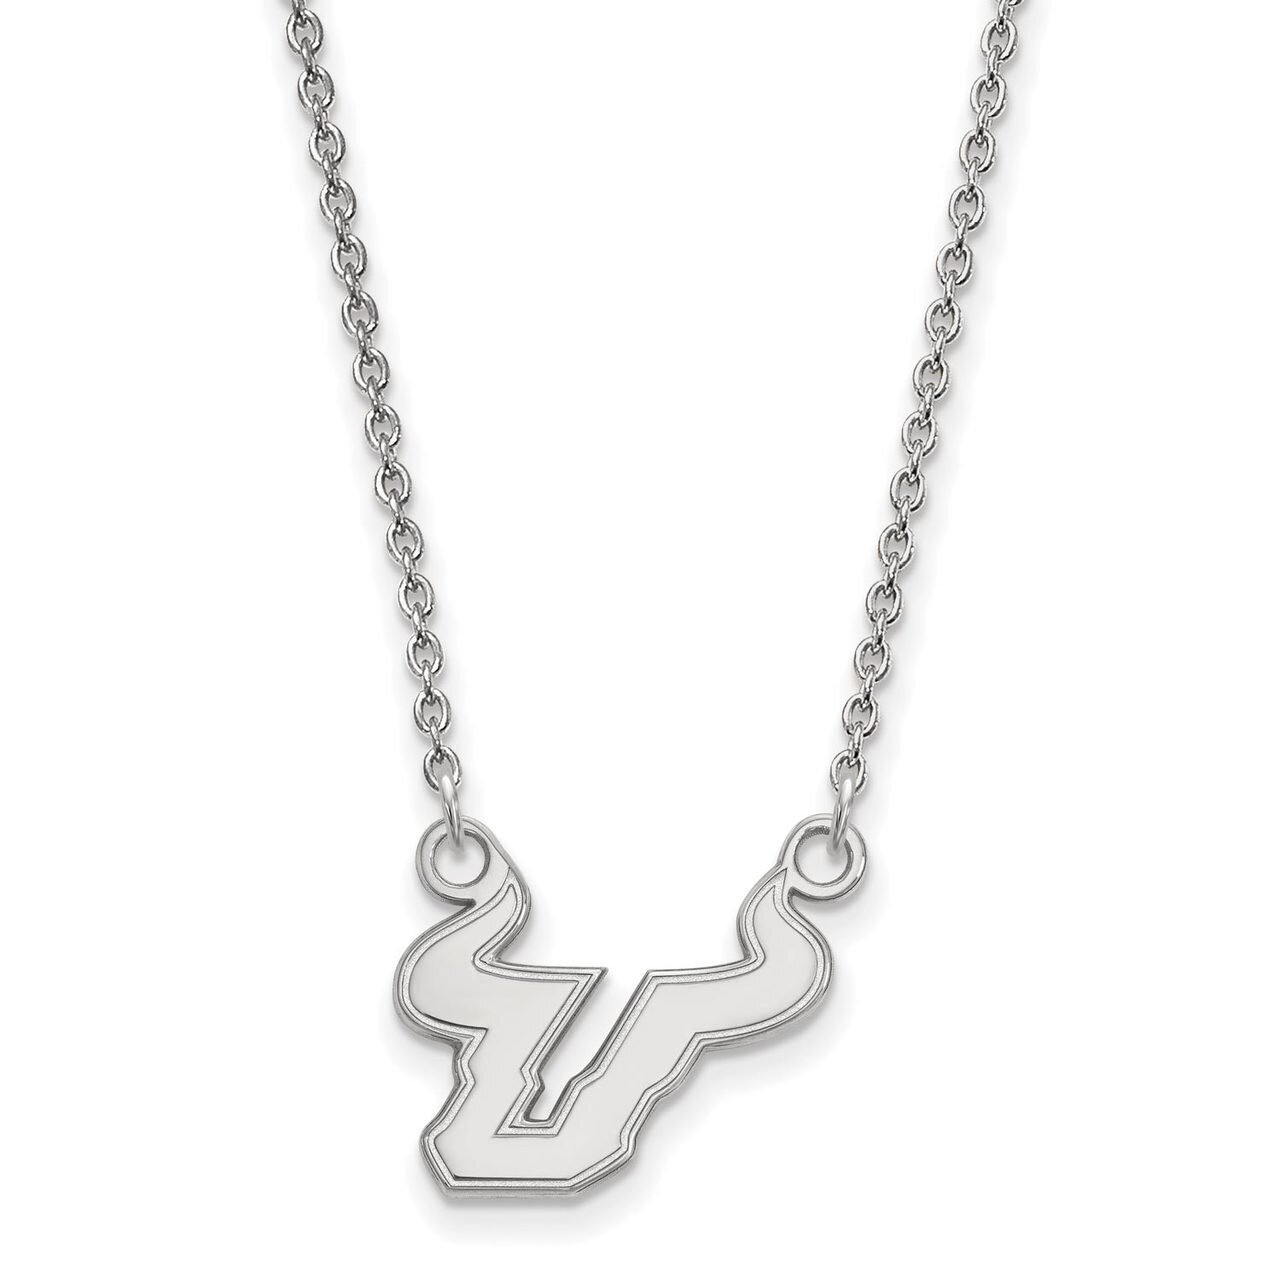 University of South Florida Small Pendant with Chain Necklace 10k White Gold 1W009USFL-18